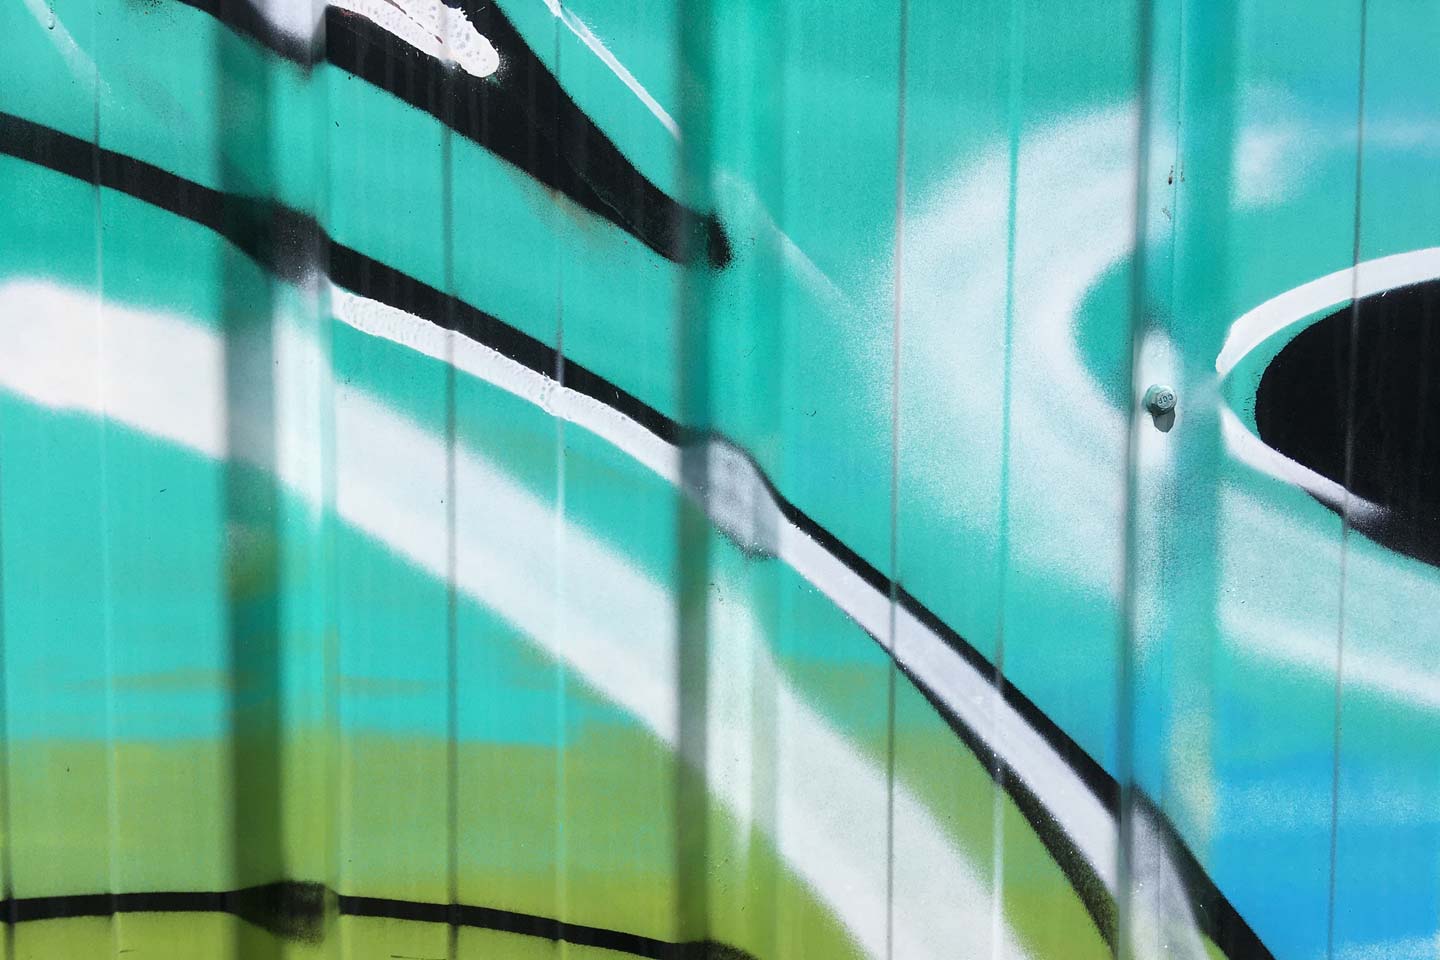 Olhao Street Art - green, turquoise and white shapes